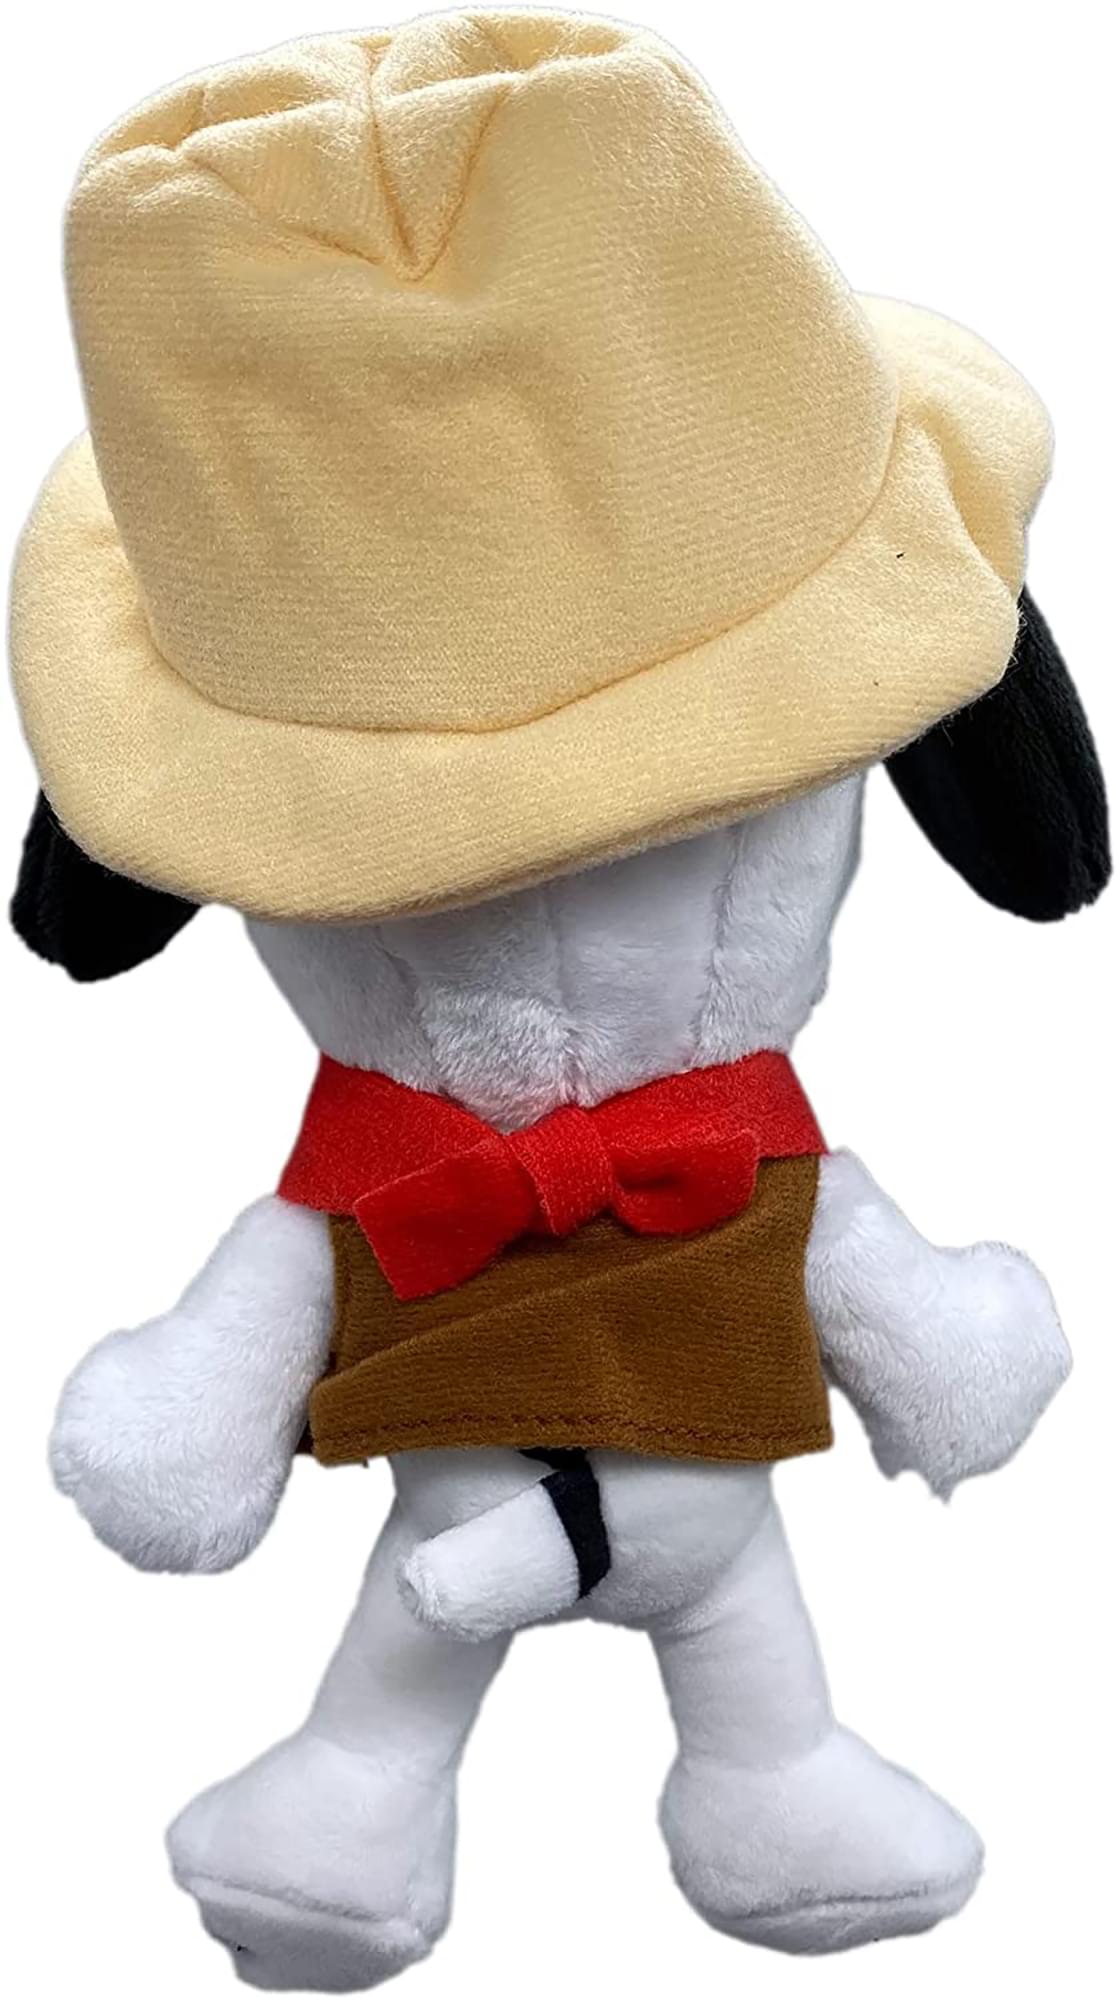 The Snoopy Show 7.5 Inch Plush | Cowboy Snoopy